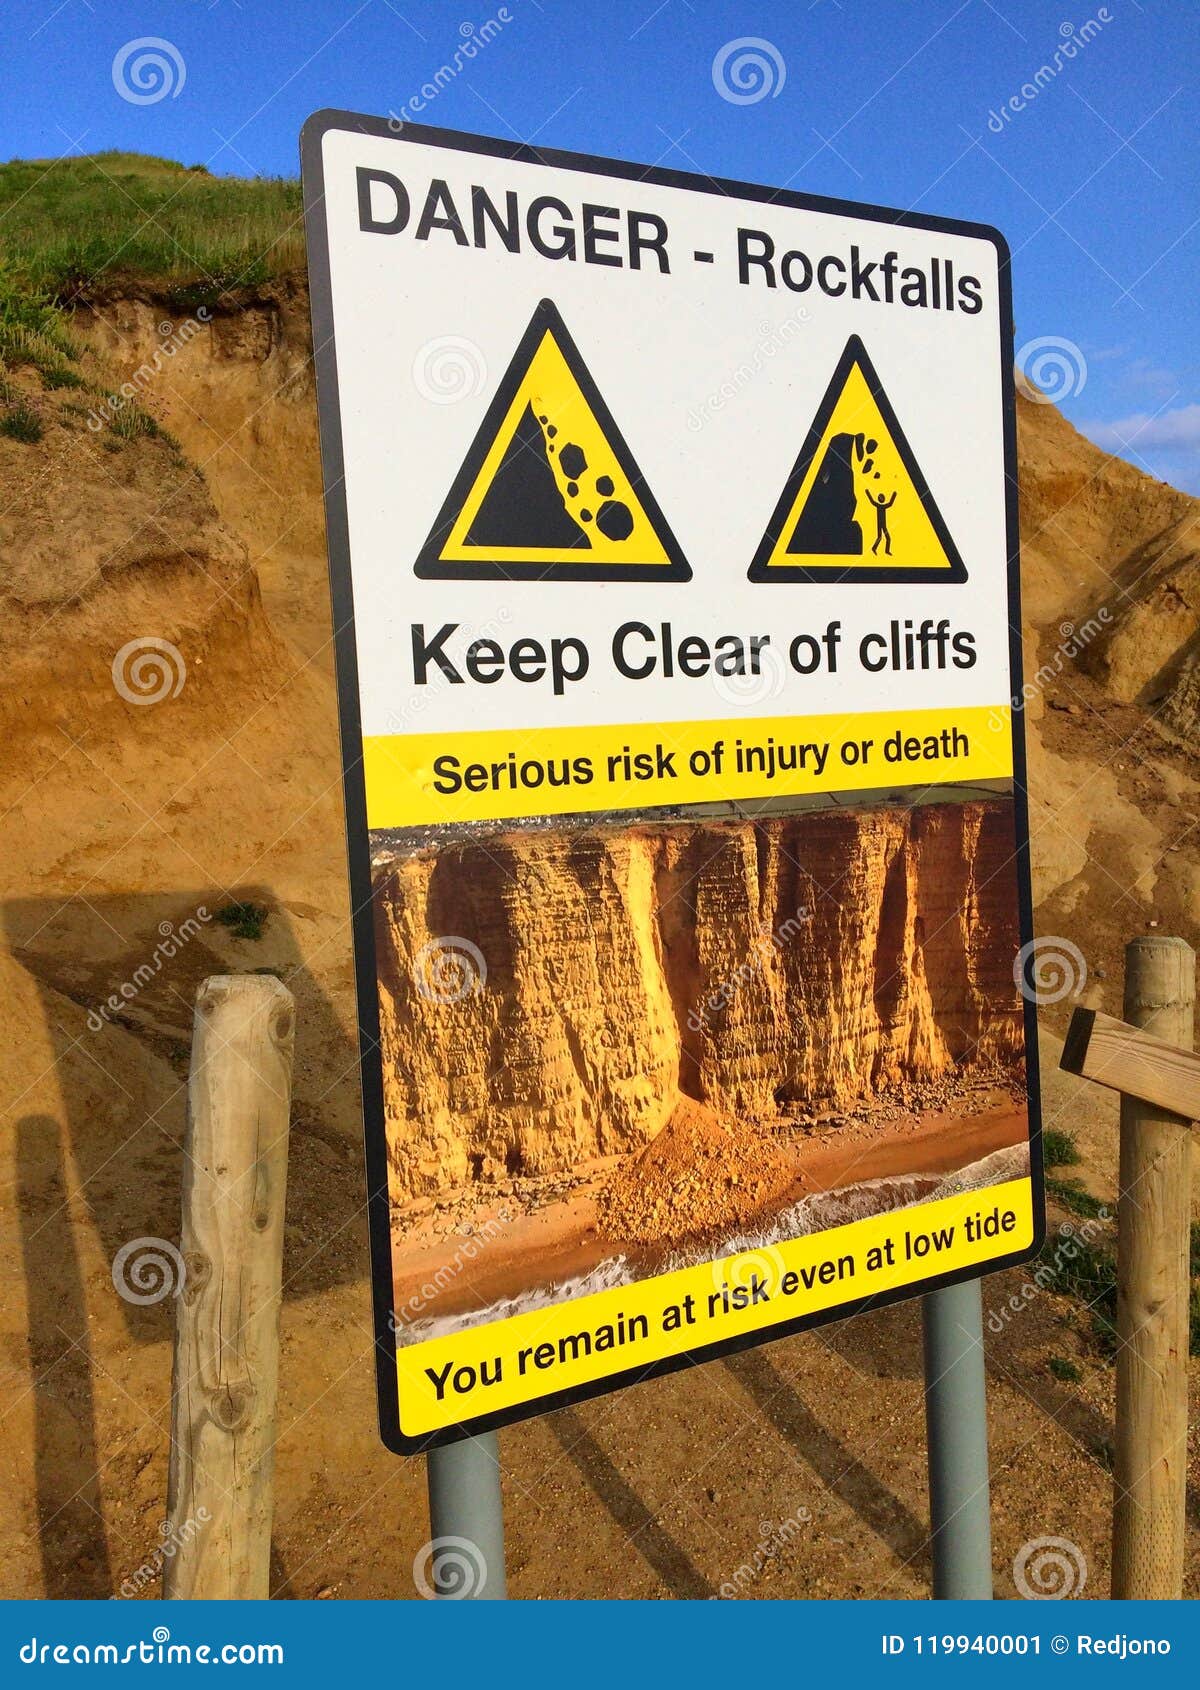 Top 95+ Images which of the following is a warning sign of frequent rockfalls? Superb